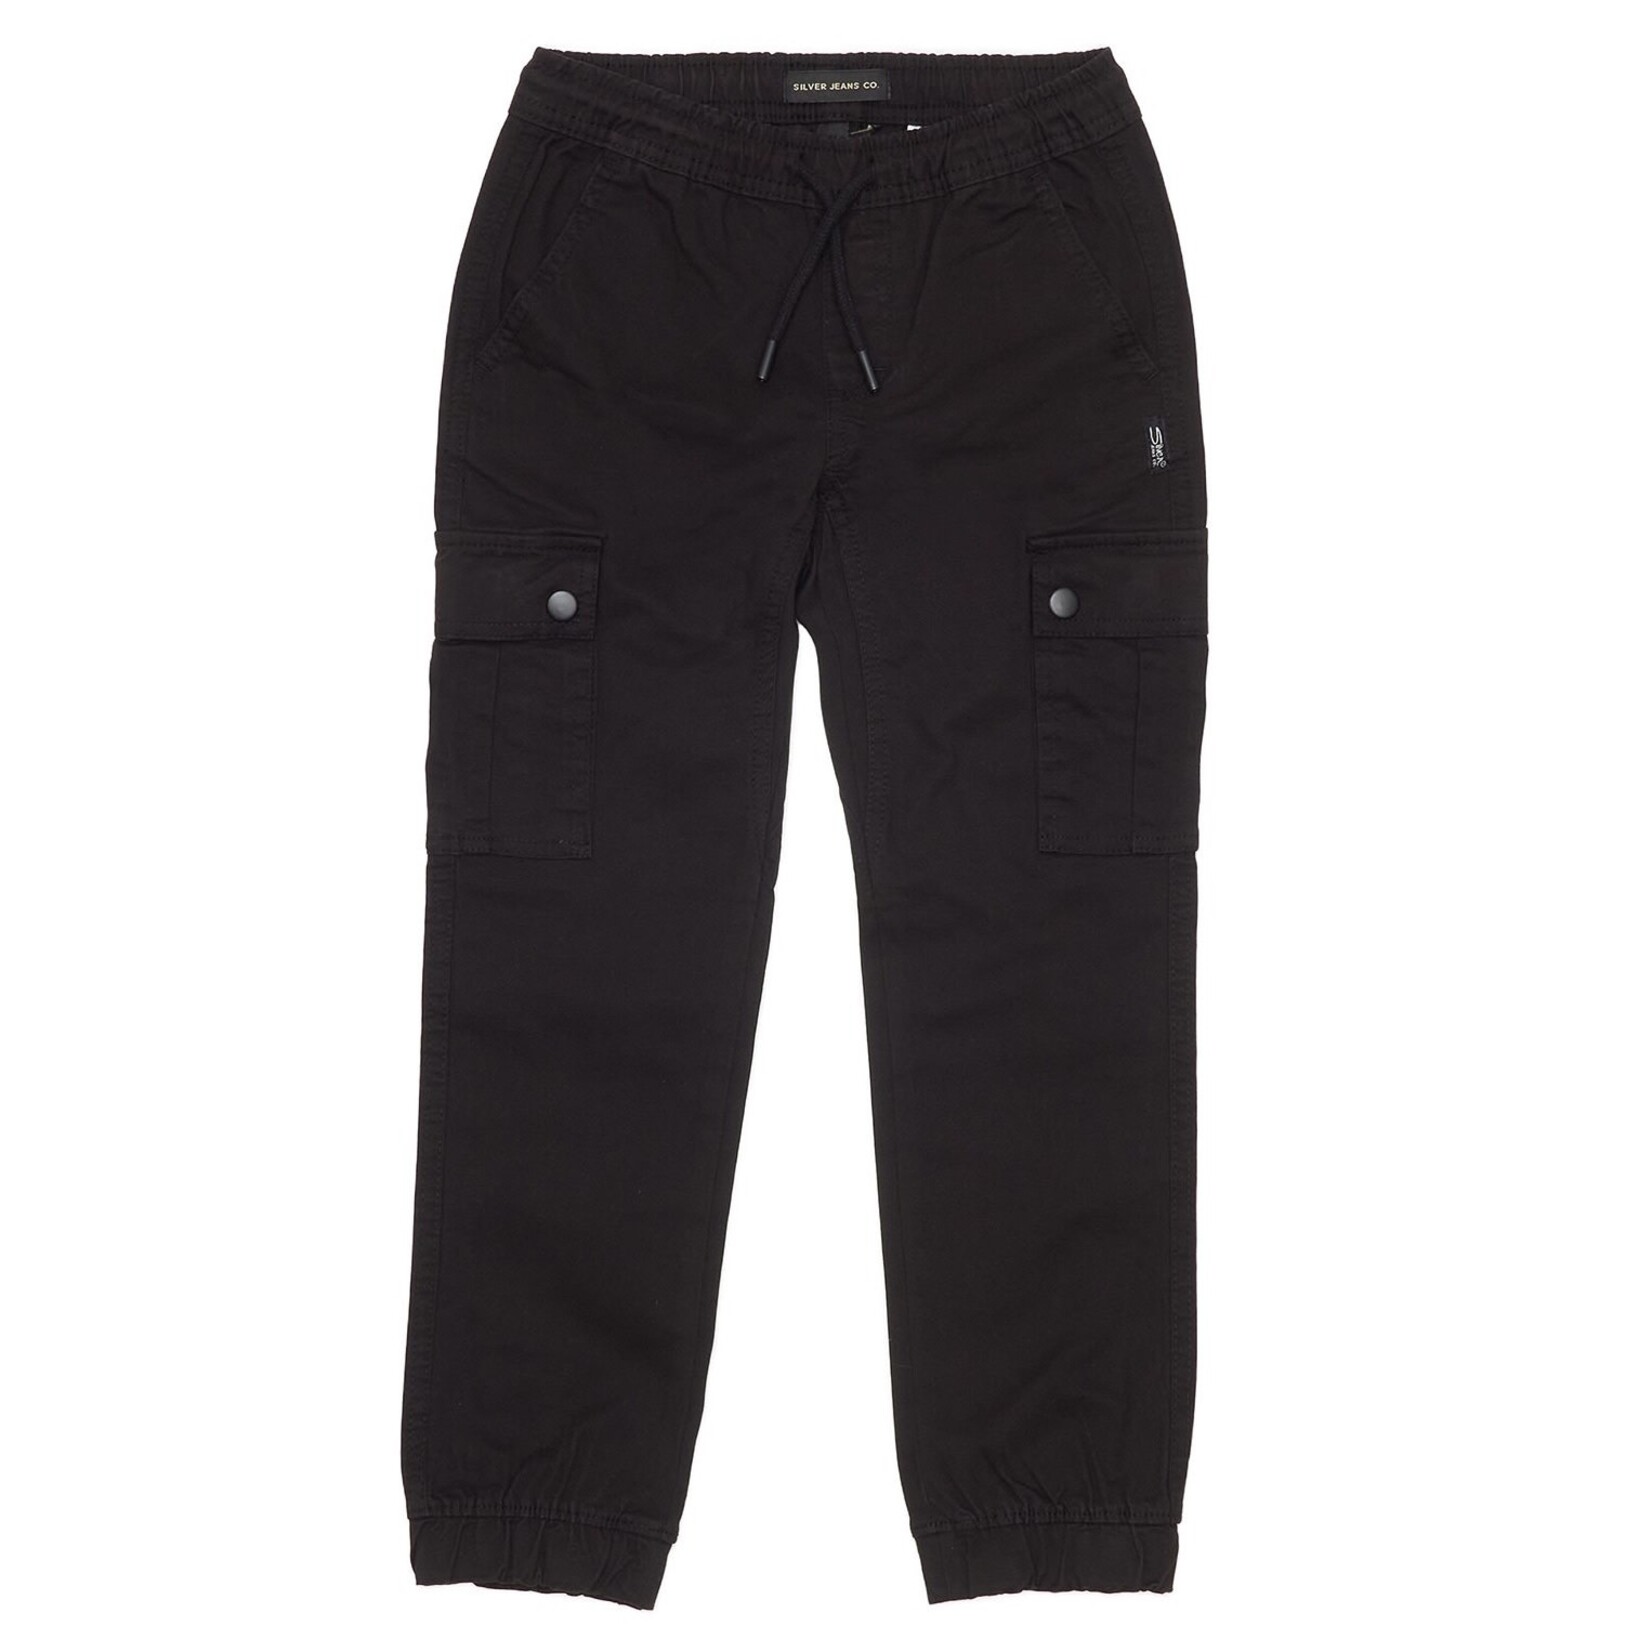 Silver Jeans Silver Jeans - Black Cairo Cargo Jogger